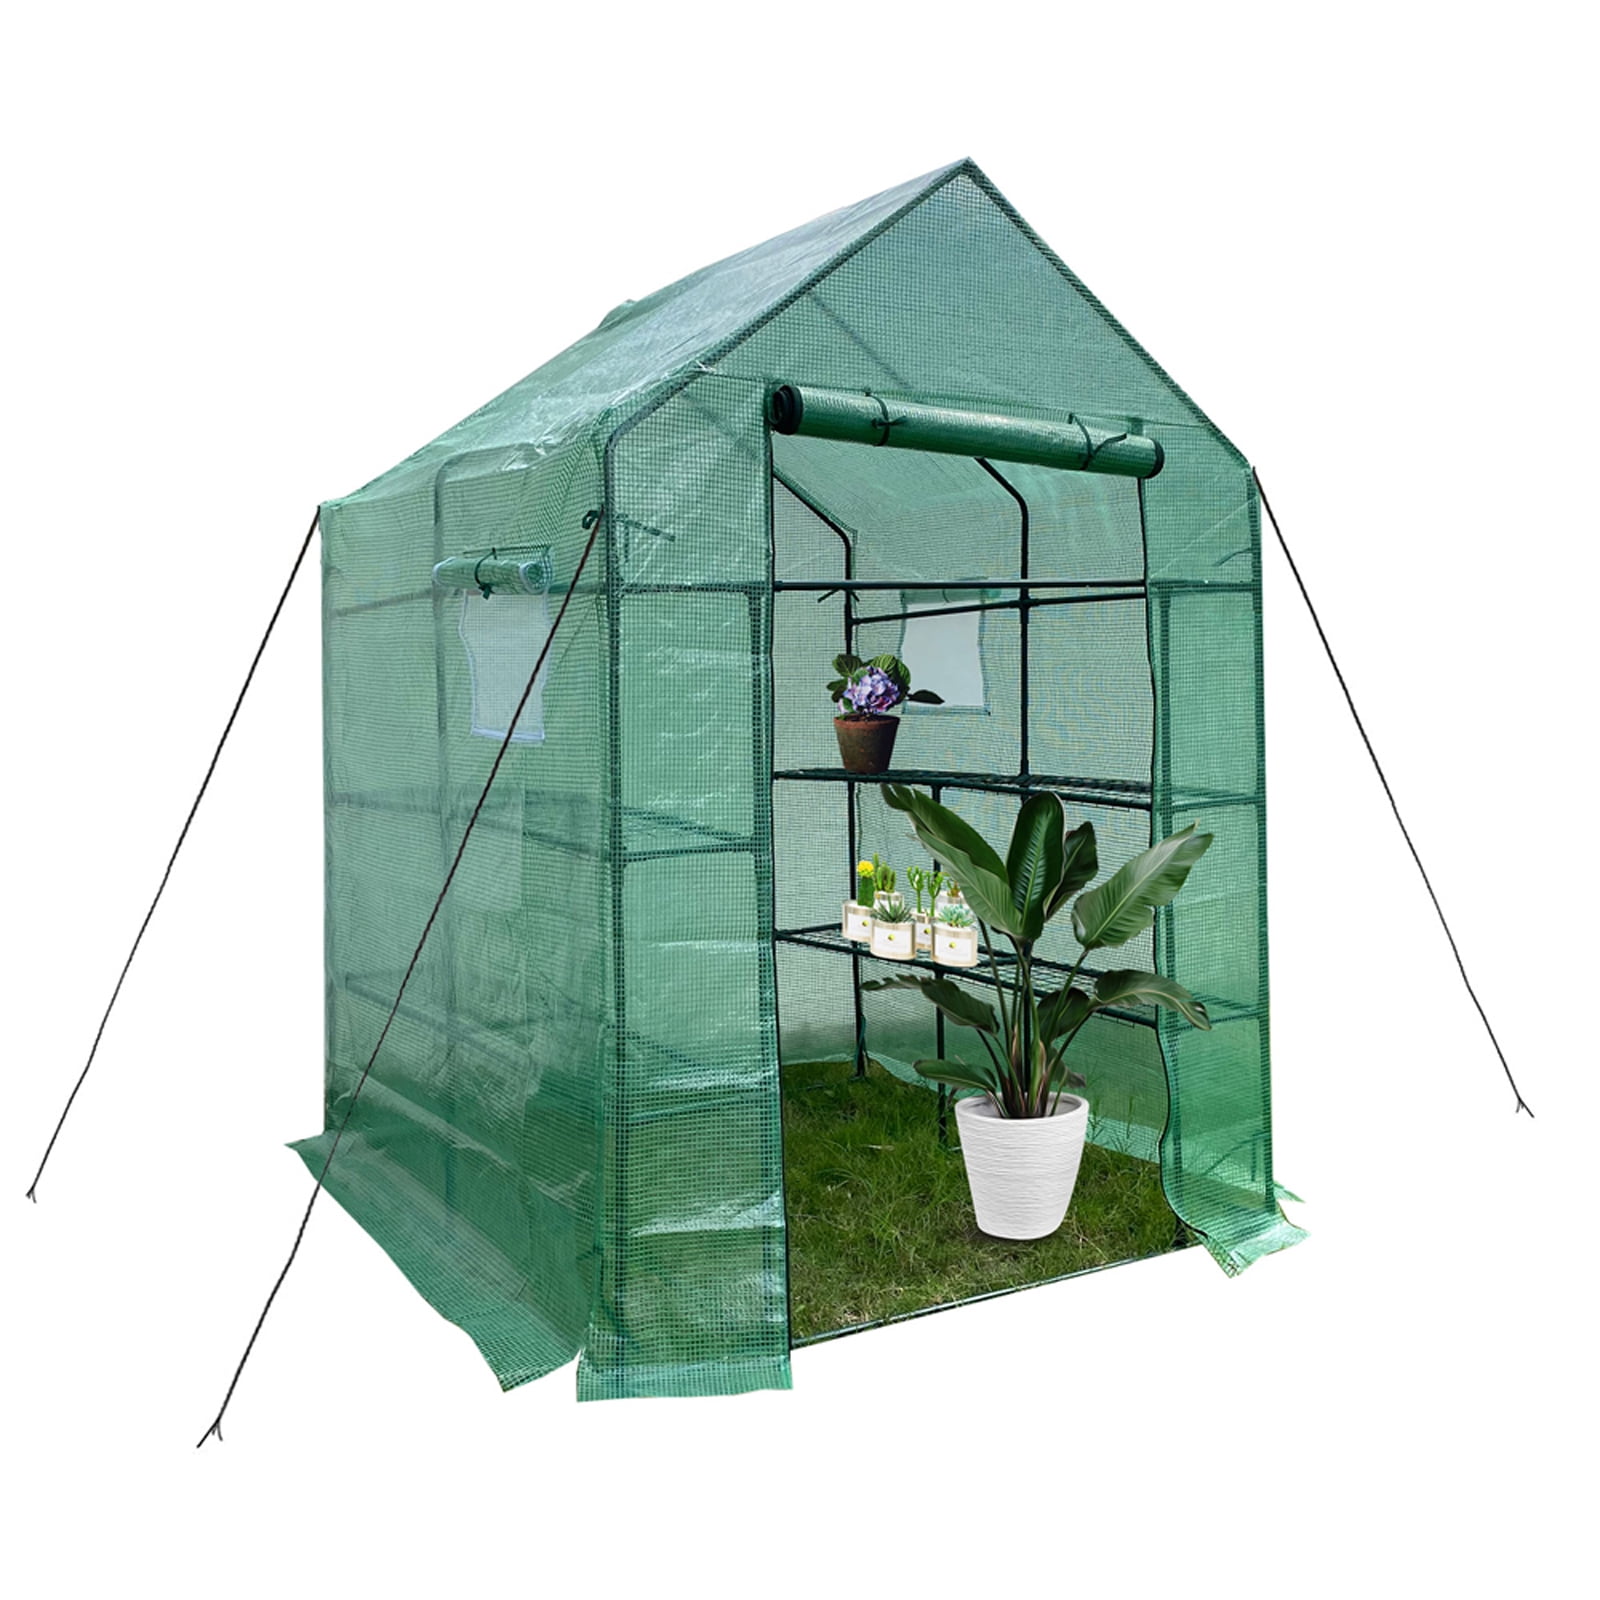 Reinforced Walk-in Greenhouse with Window,Plant Gardening Green House 2 Tiers and 8 Shelves,L56.5 x W56.5 x H76.5 